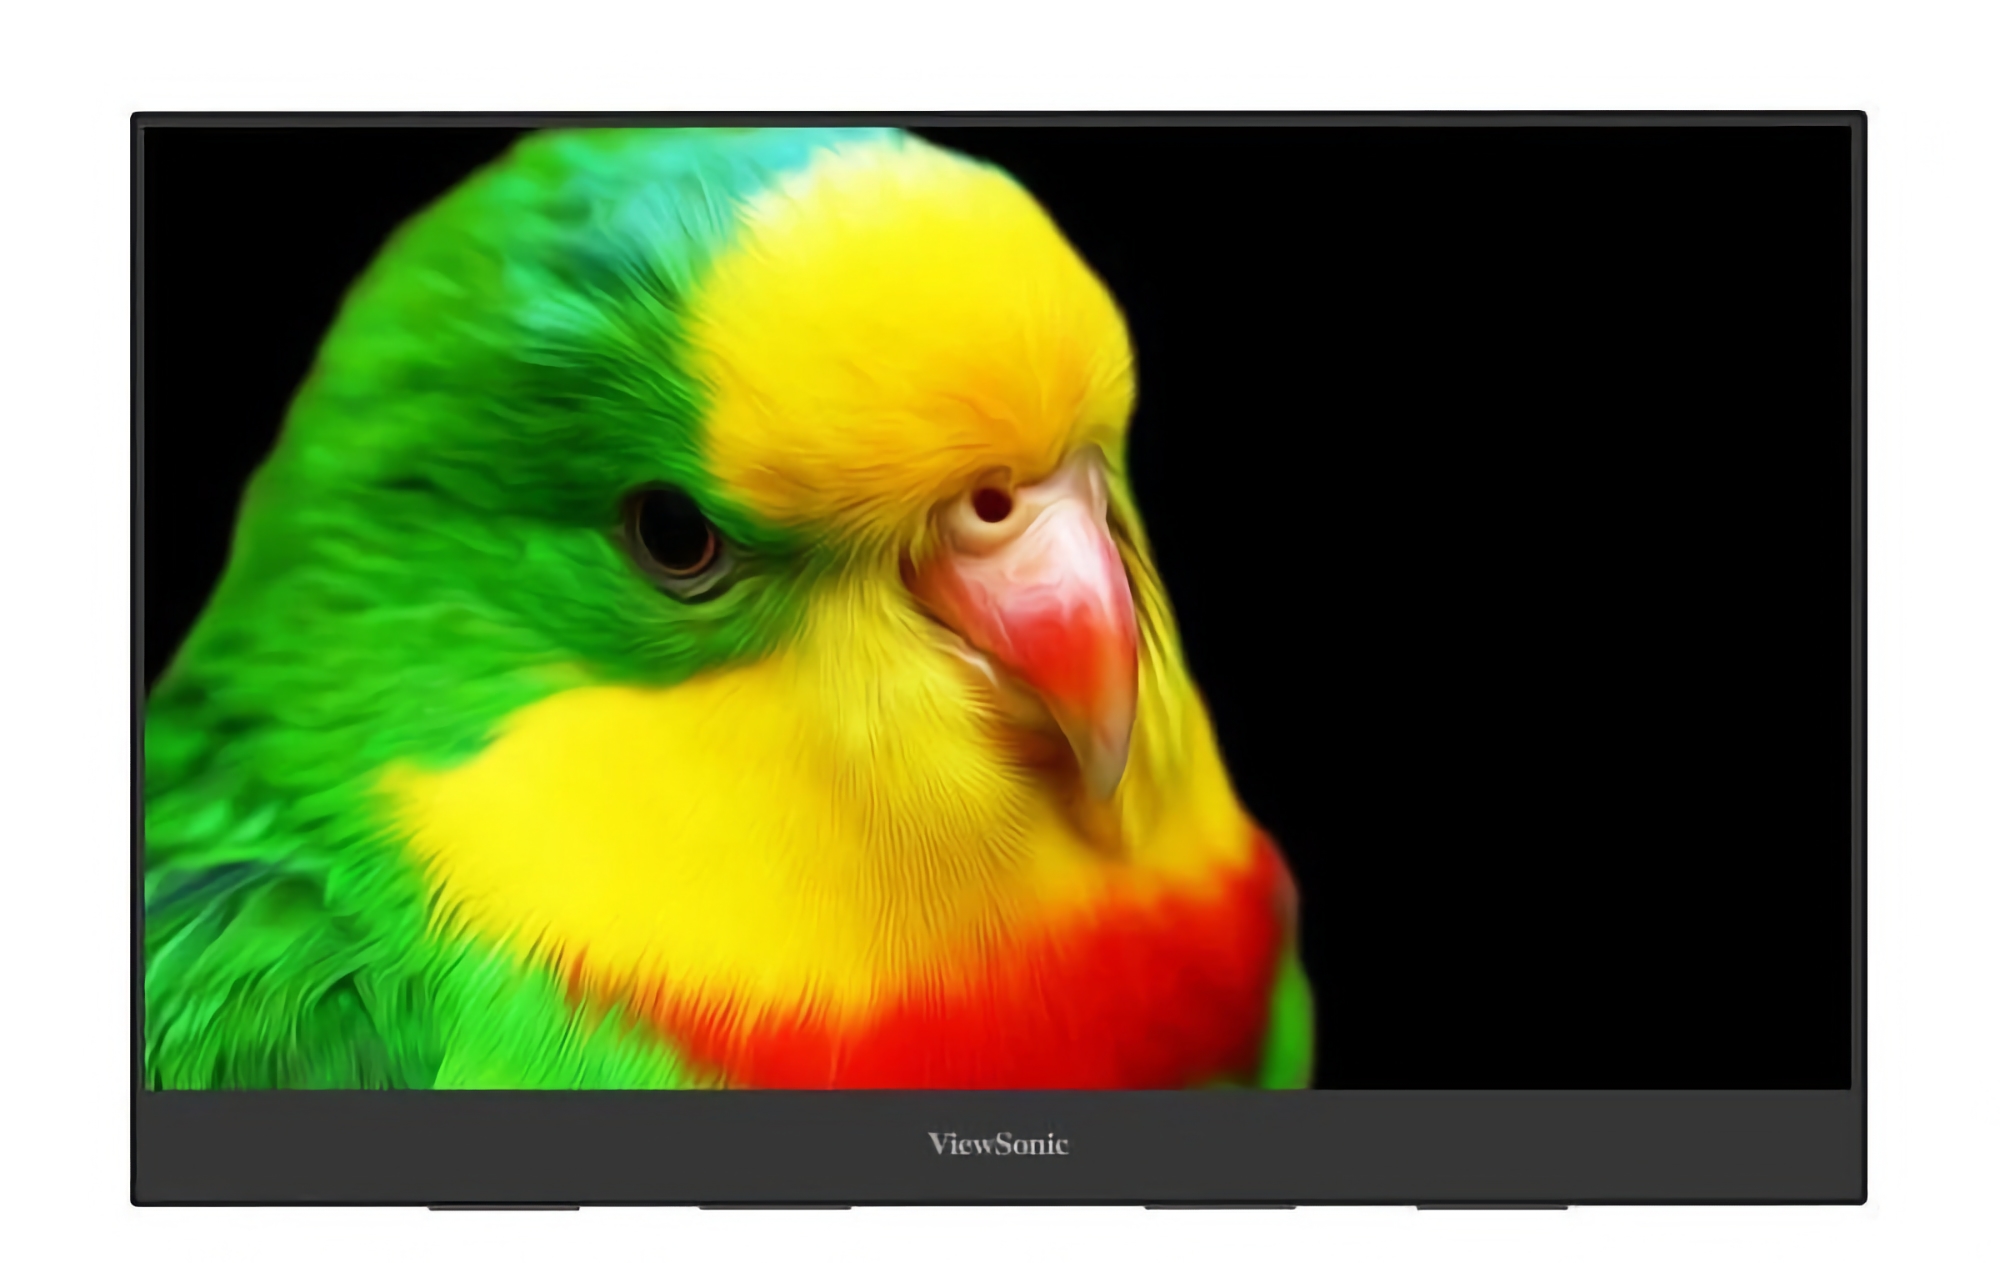 ViewSonic onthult 15,6-inch draagbare 4K-monitor met OLED-scherm